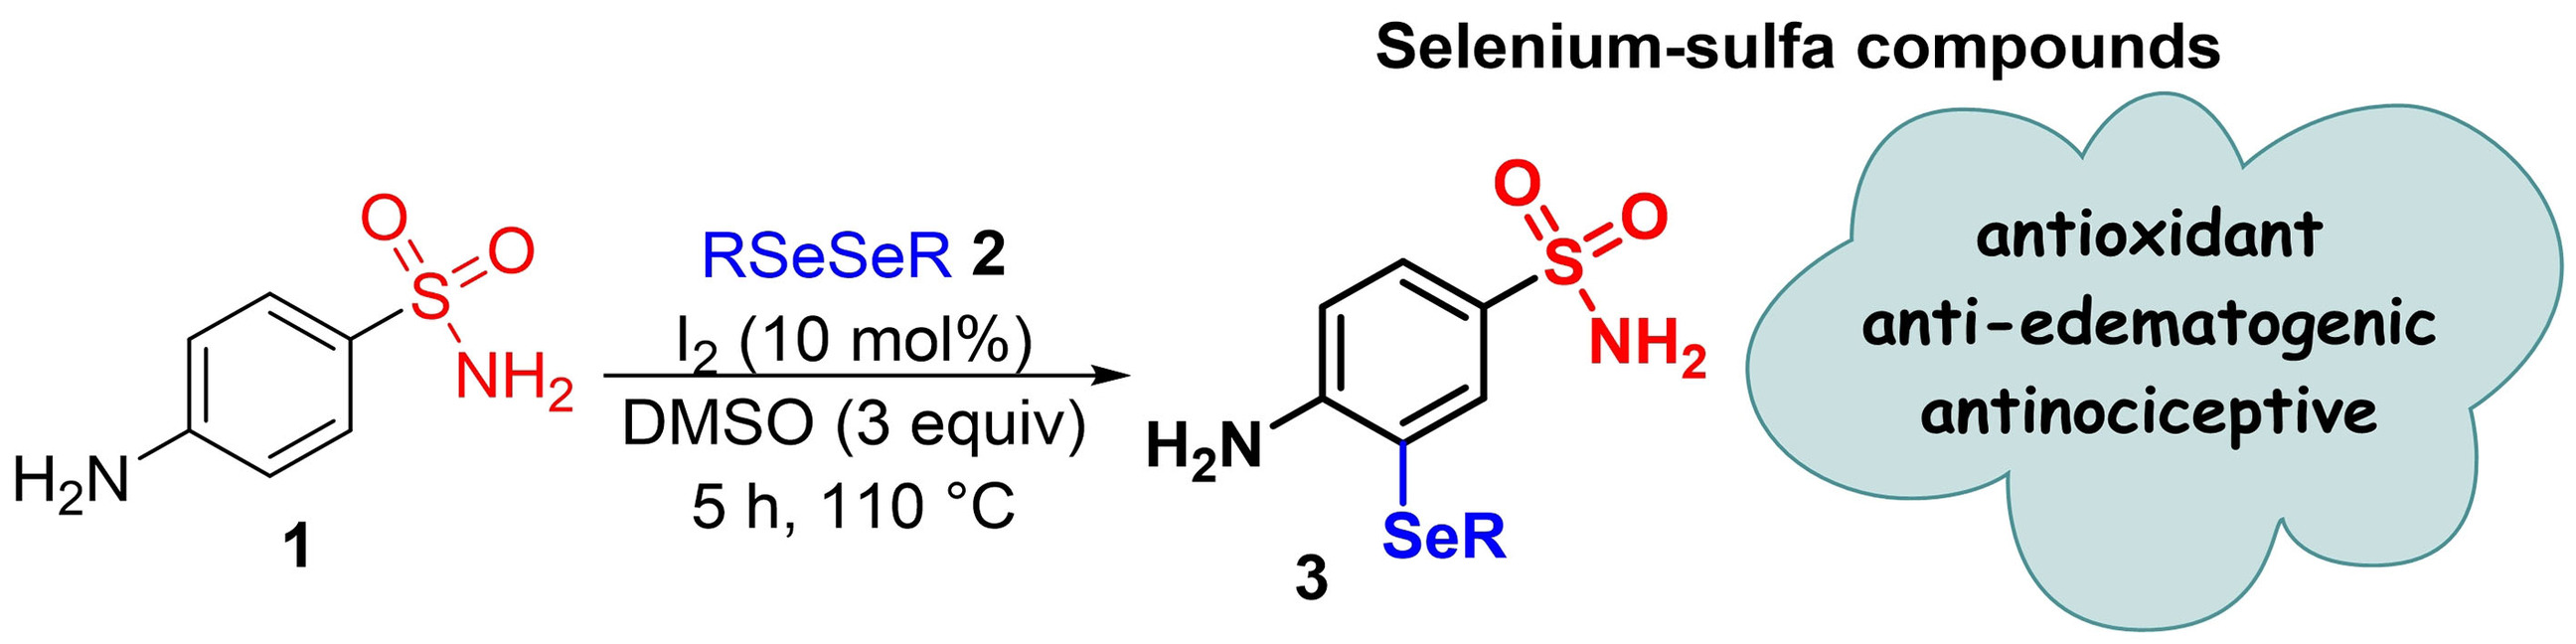 Synthesis and Evaluation of Antioxidant, Anti‐Edematogenic and Antinociceptive Properties of Selenium‐Sulfa Compounds